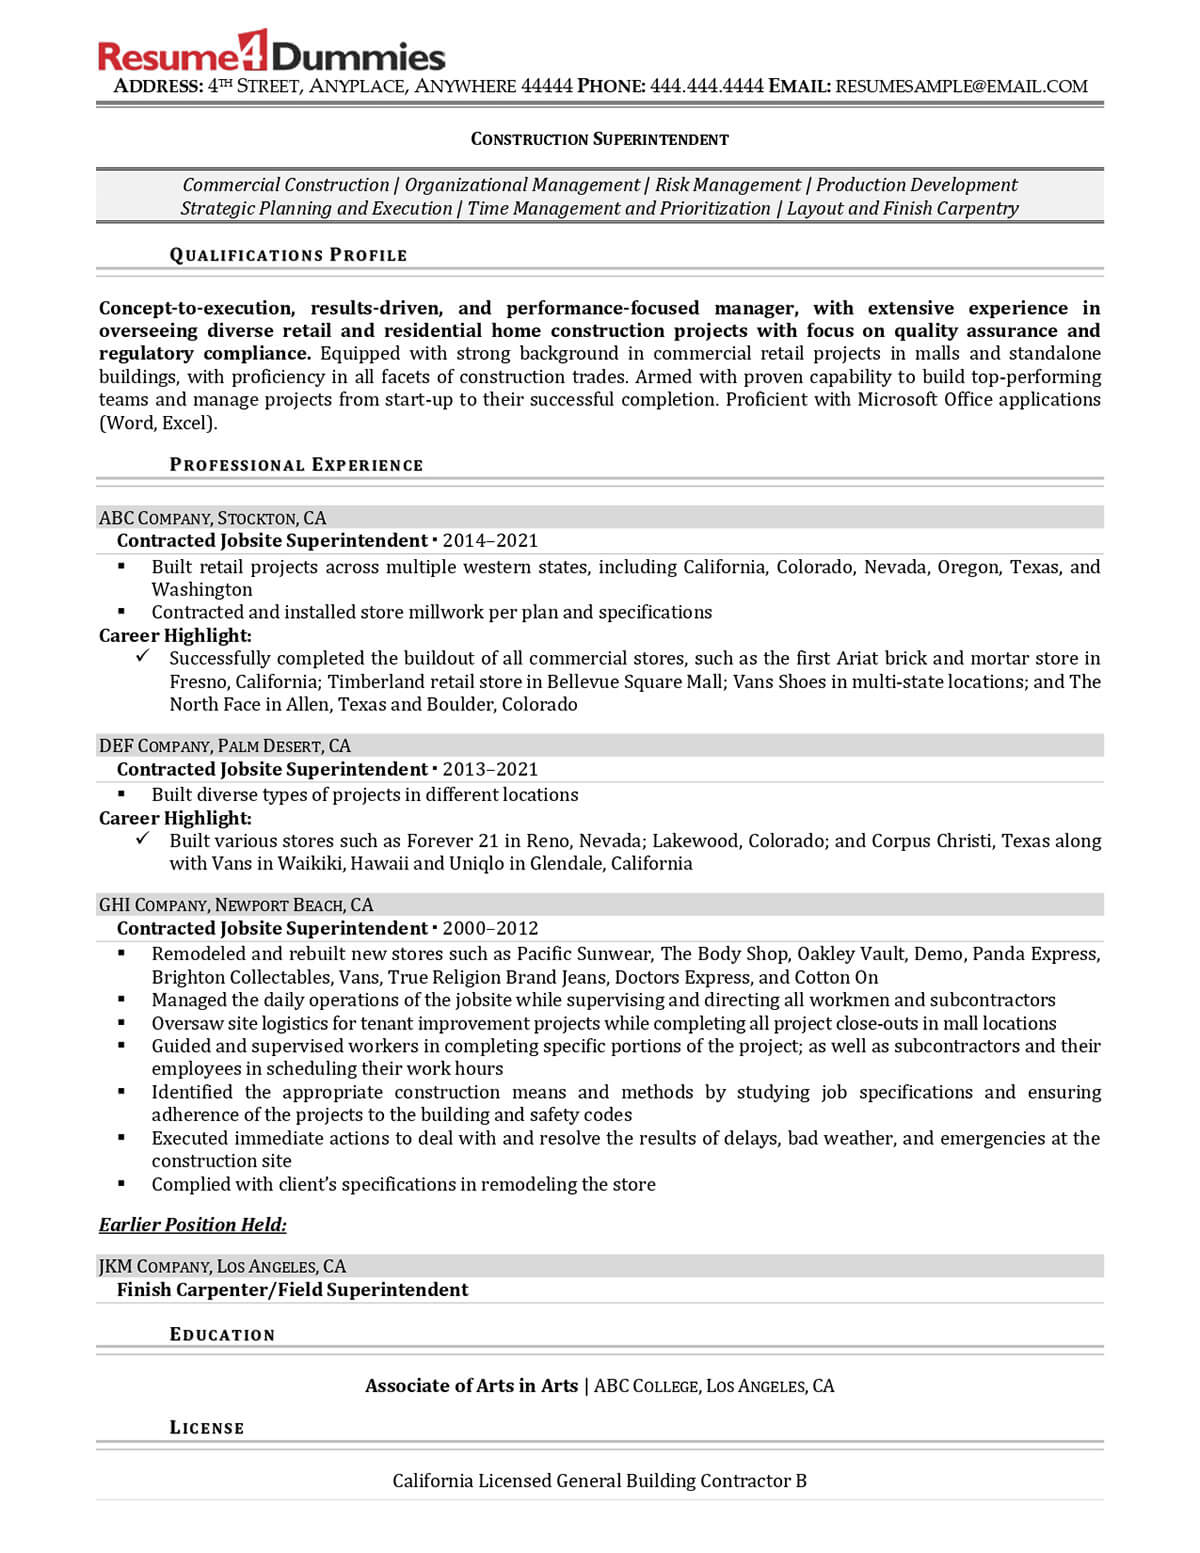 construction superintendent resume example